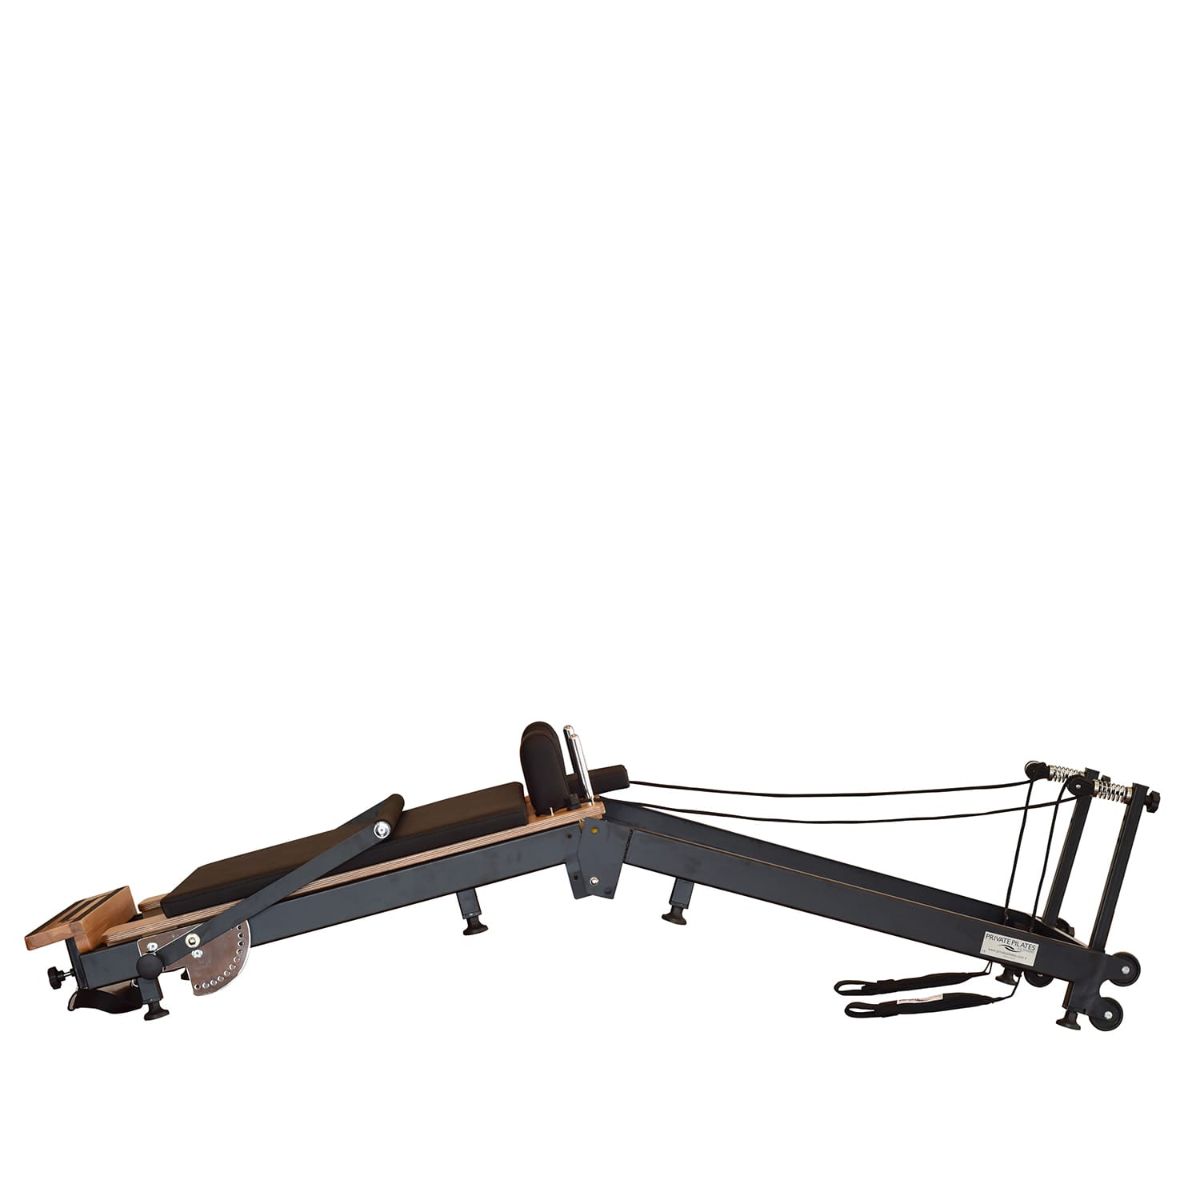 Buy Private Pilates Foldable Metal Reformer with Free Shipping